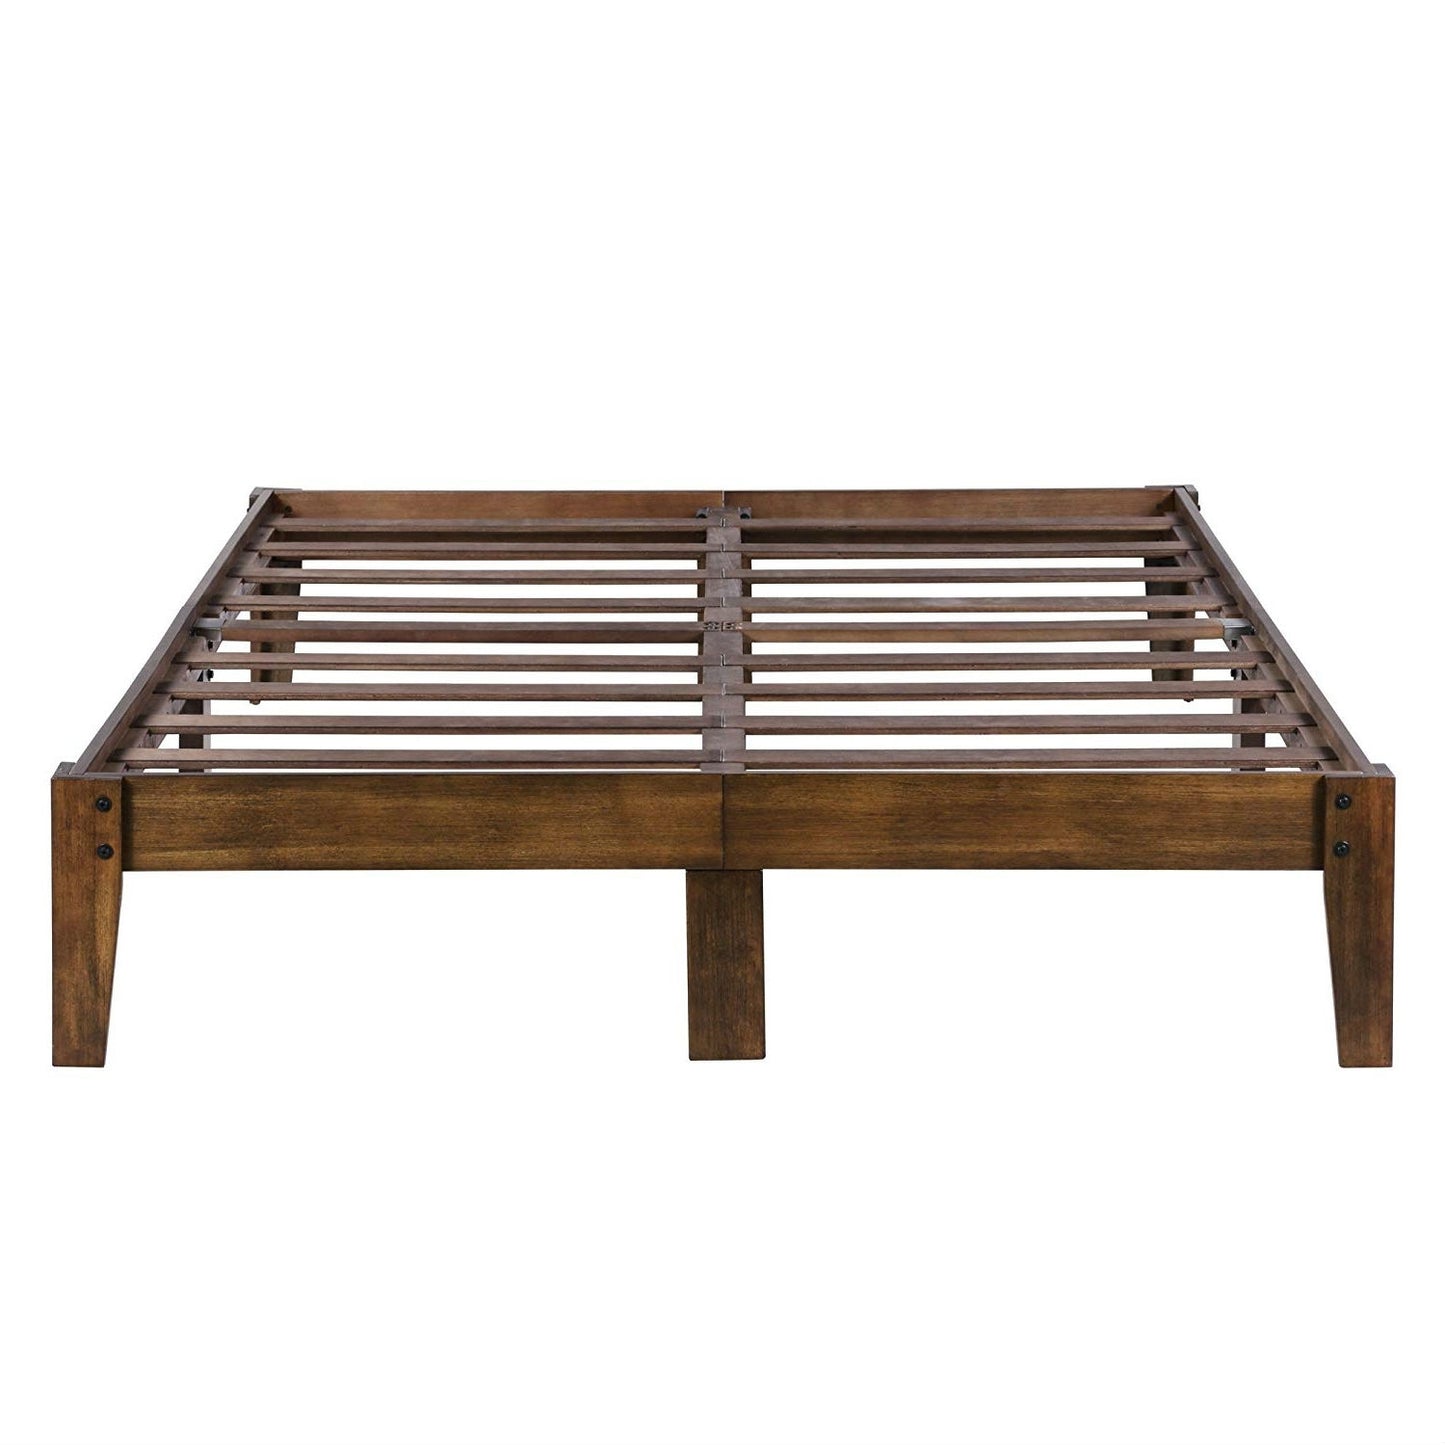 Queen size Solid Wood Platform Bed Frame in Brown Natural Finish